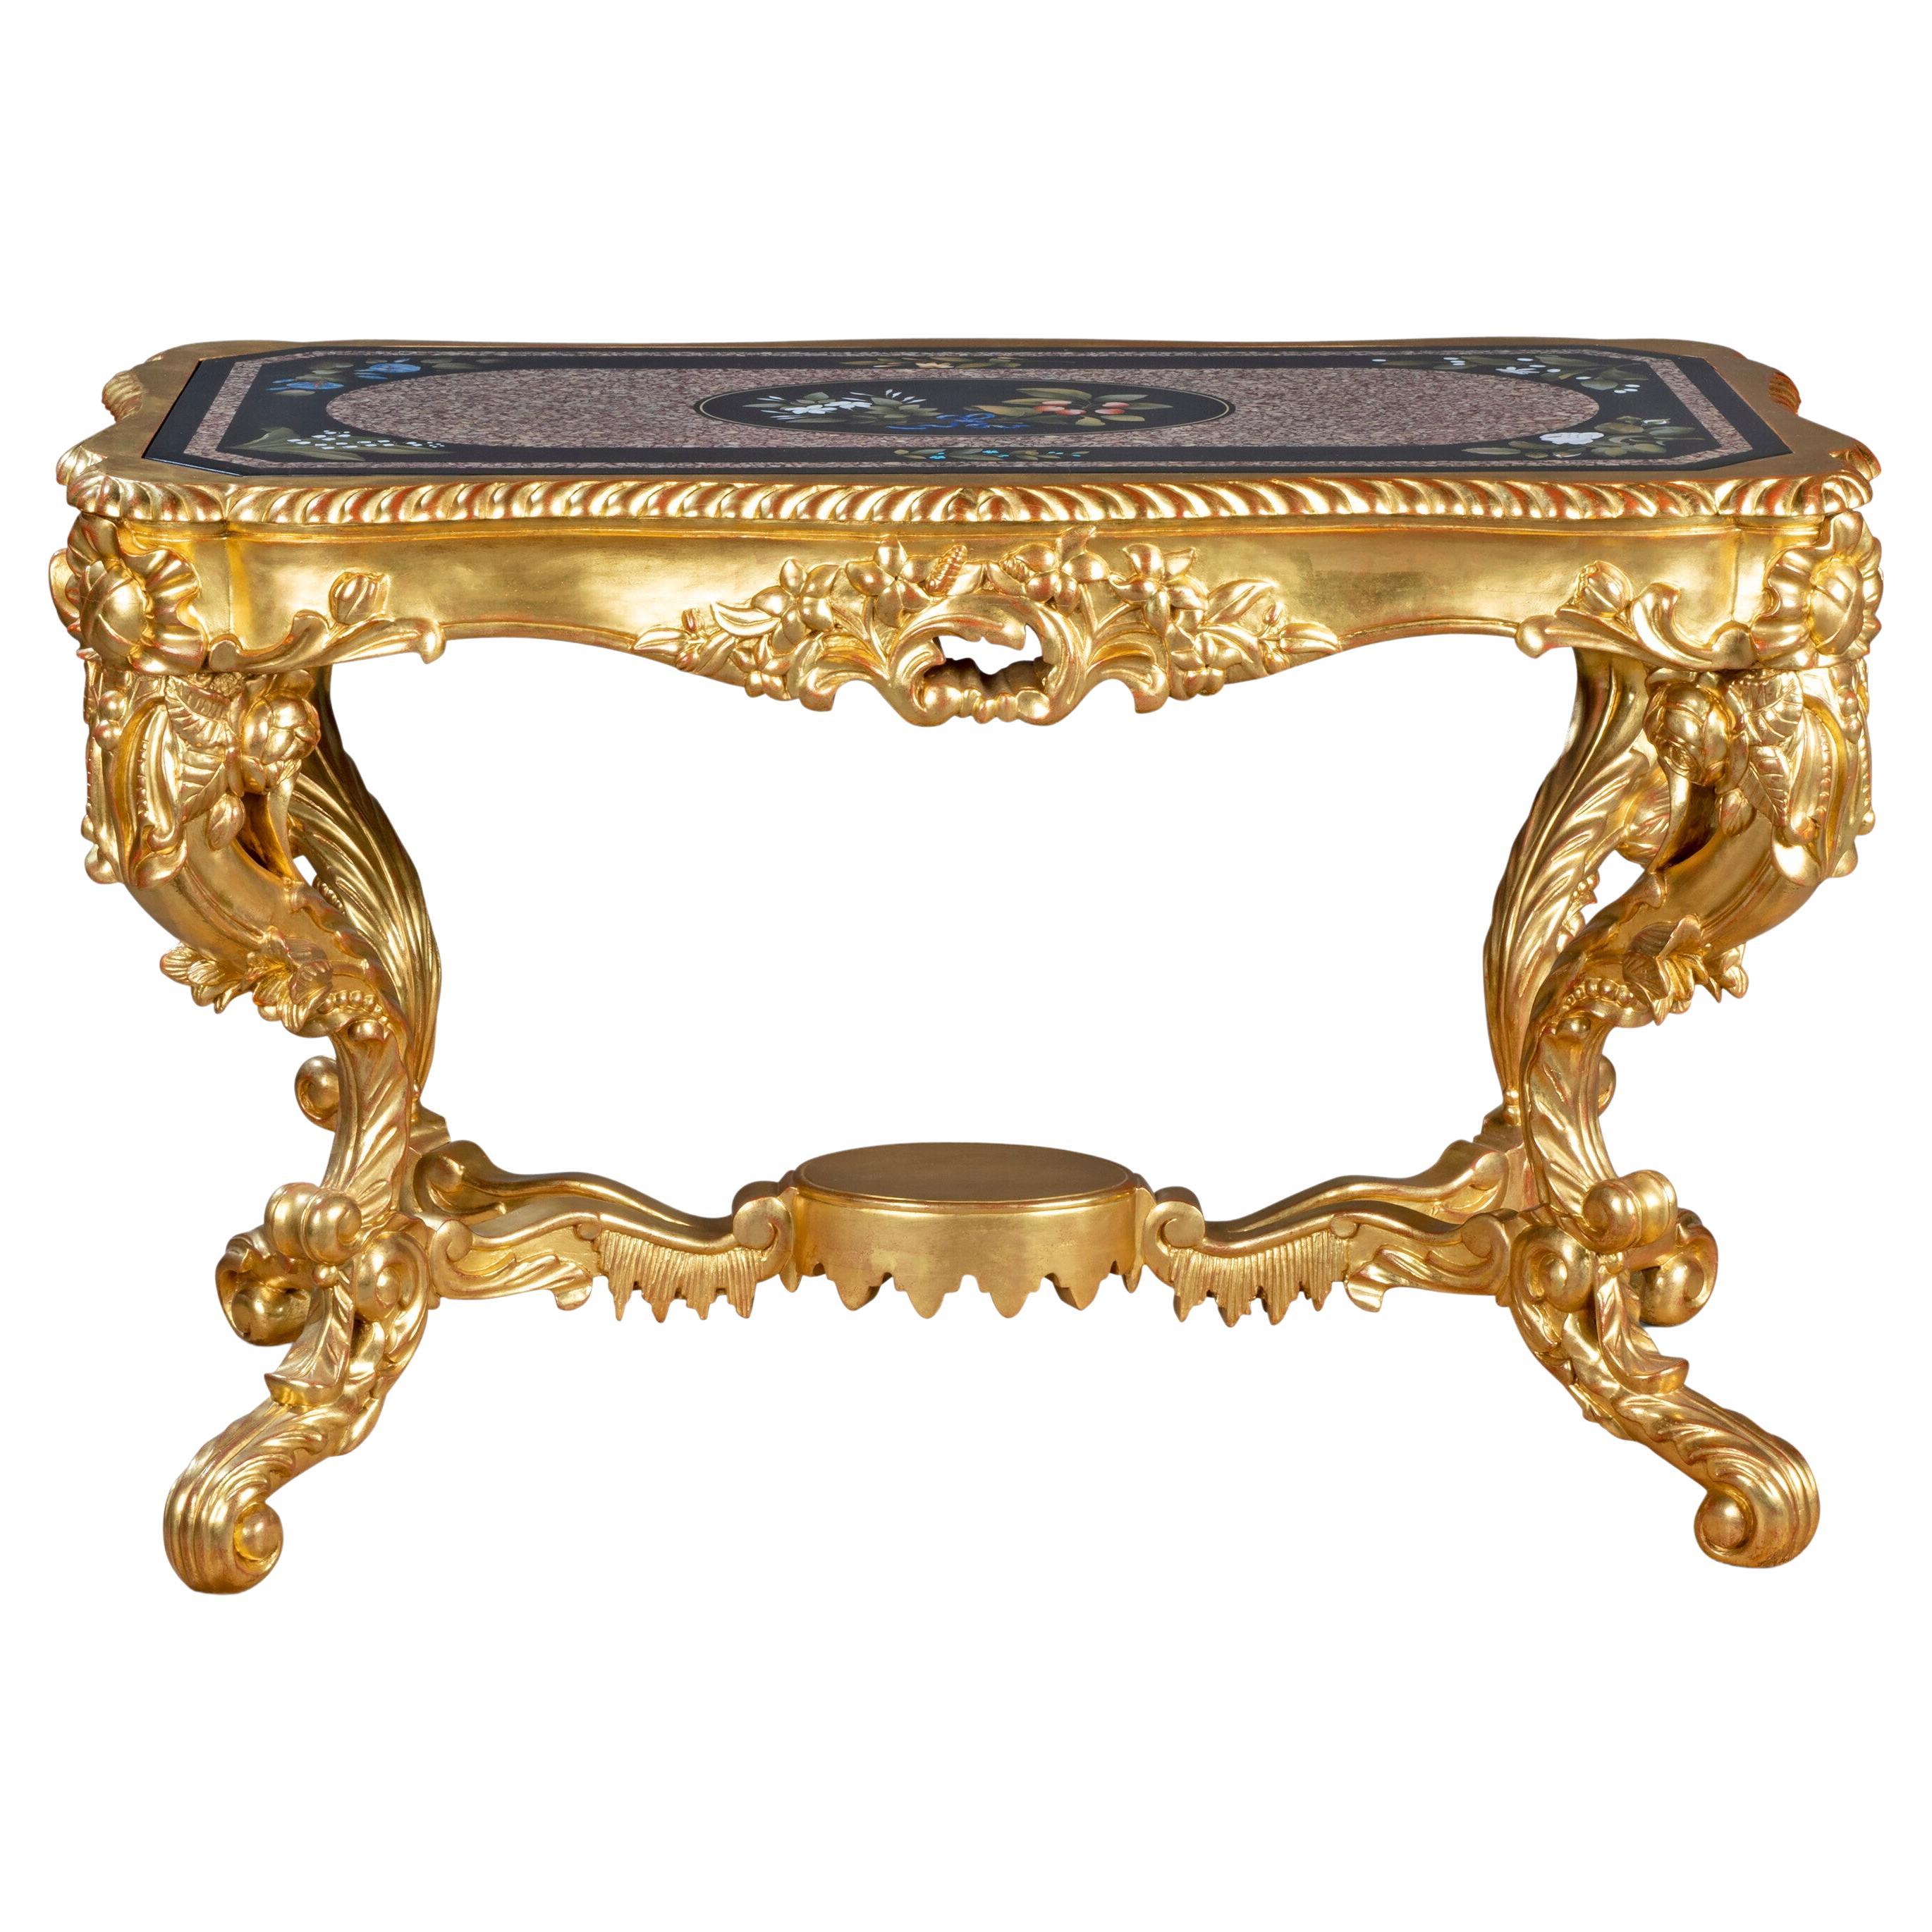 Giltwood Low Centre Table With A Pietre Dure Inlaid Marble Top